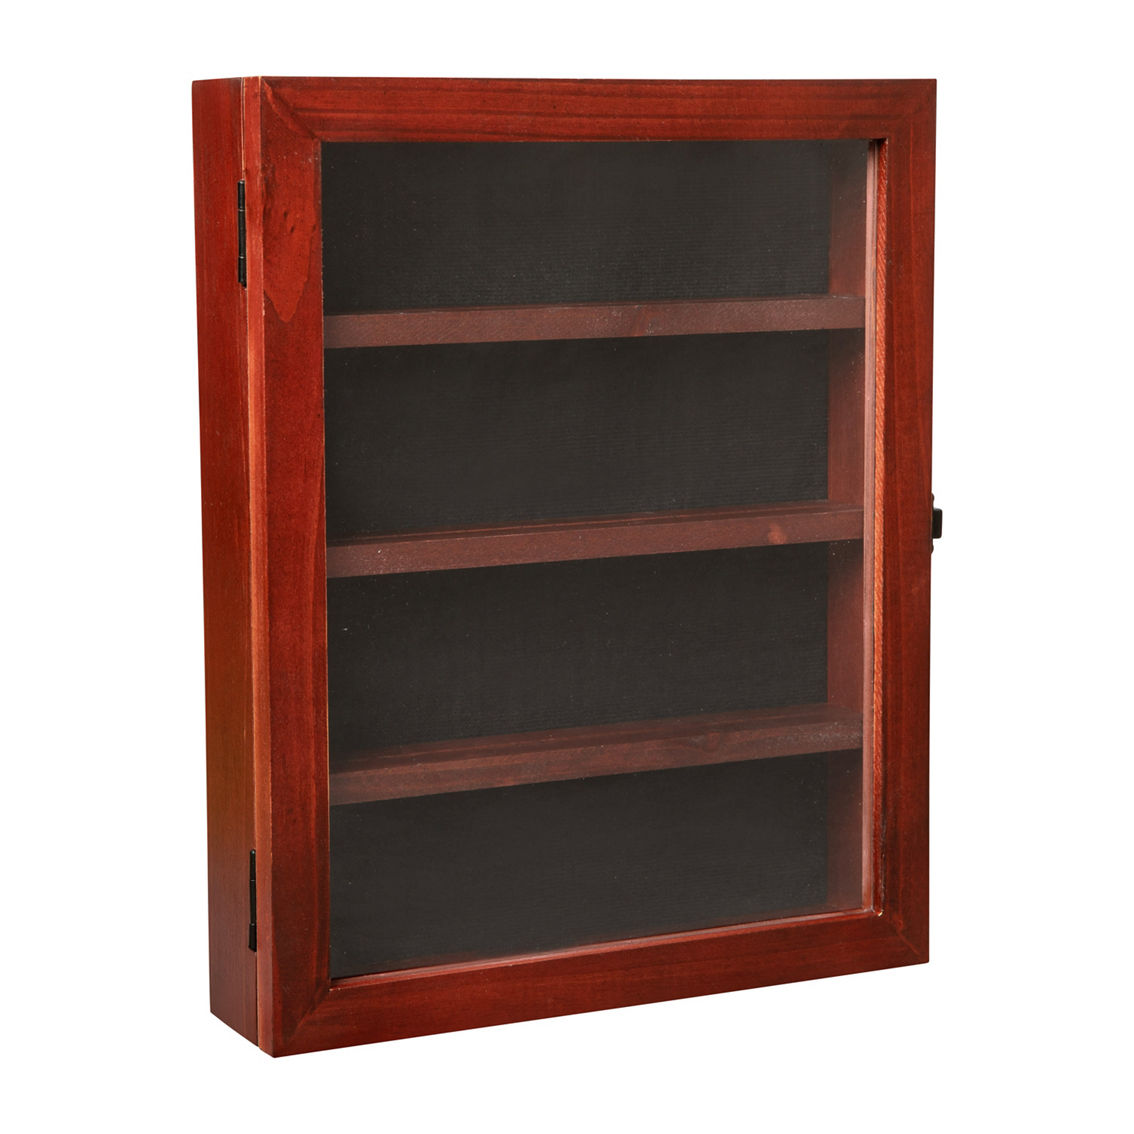 Flash Furniture Solid Pine Wood Medals Display Case - Image 3 of 5